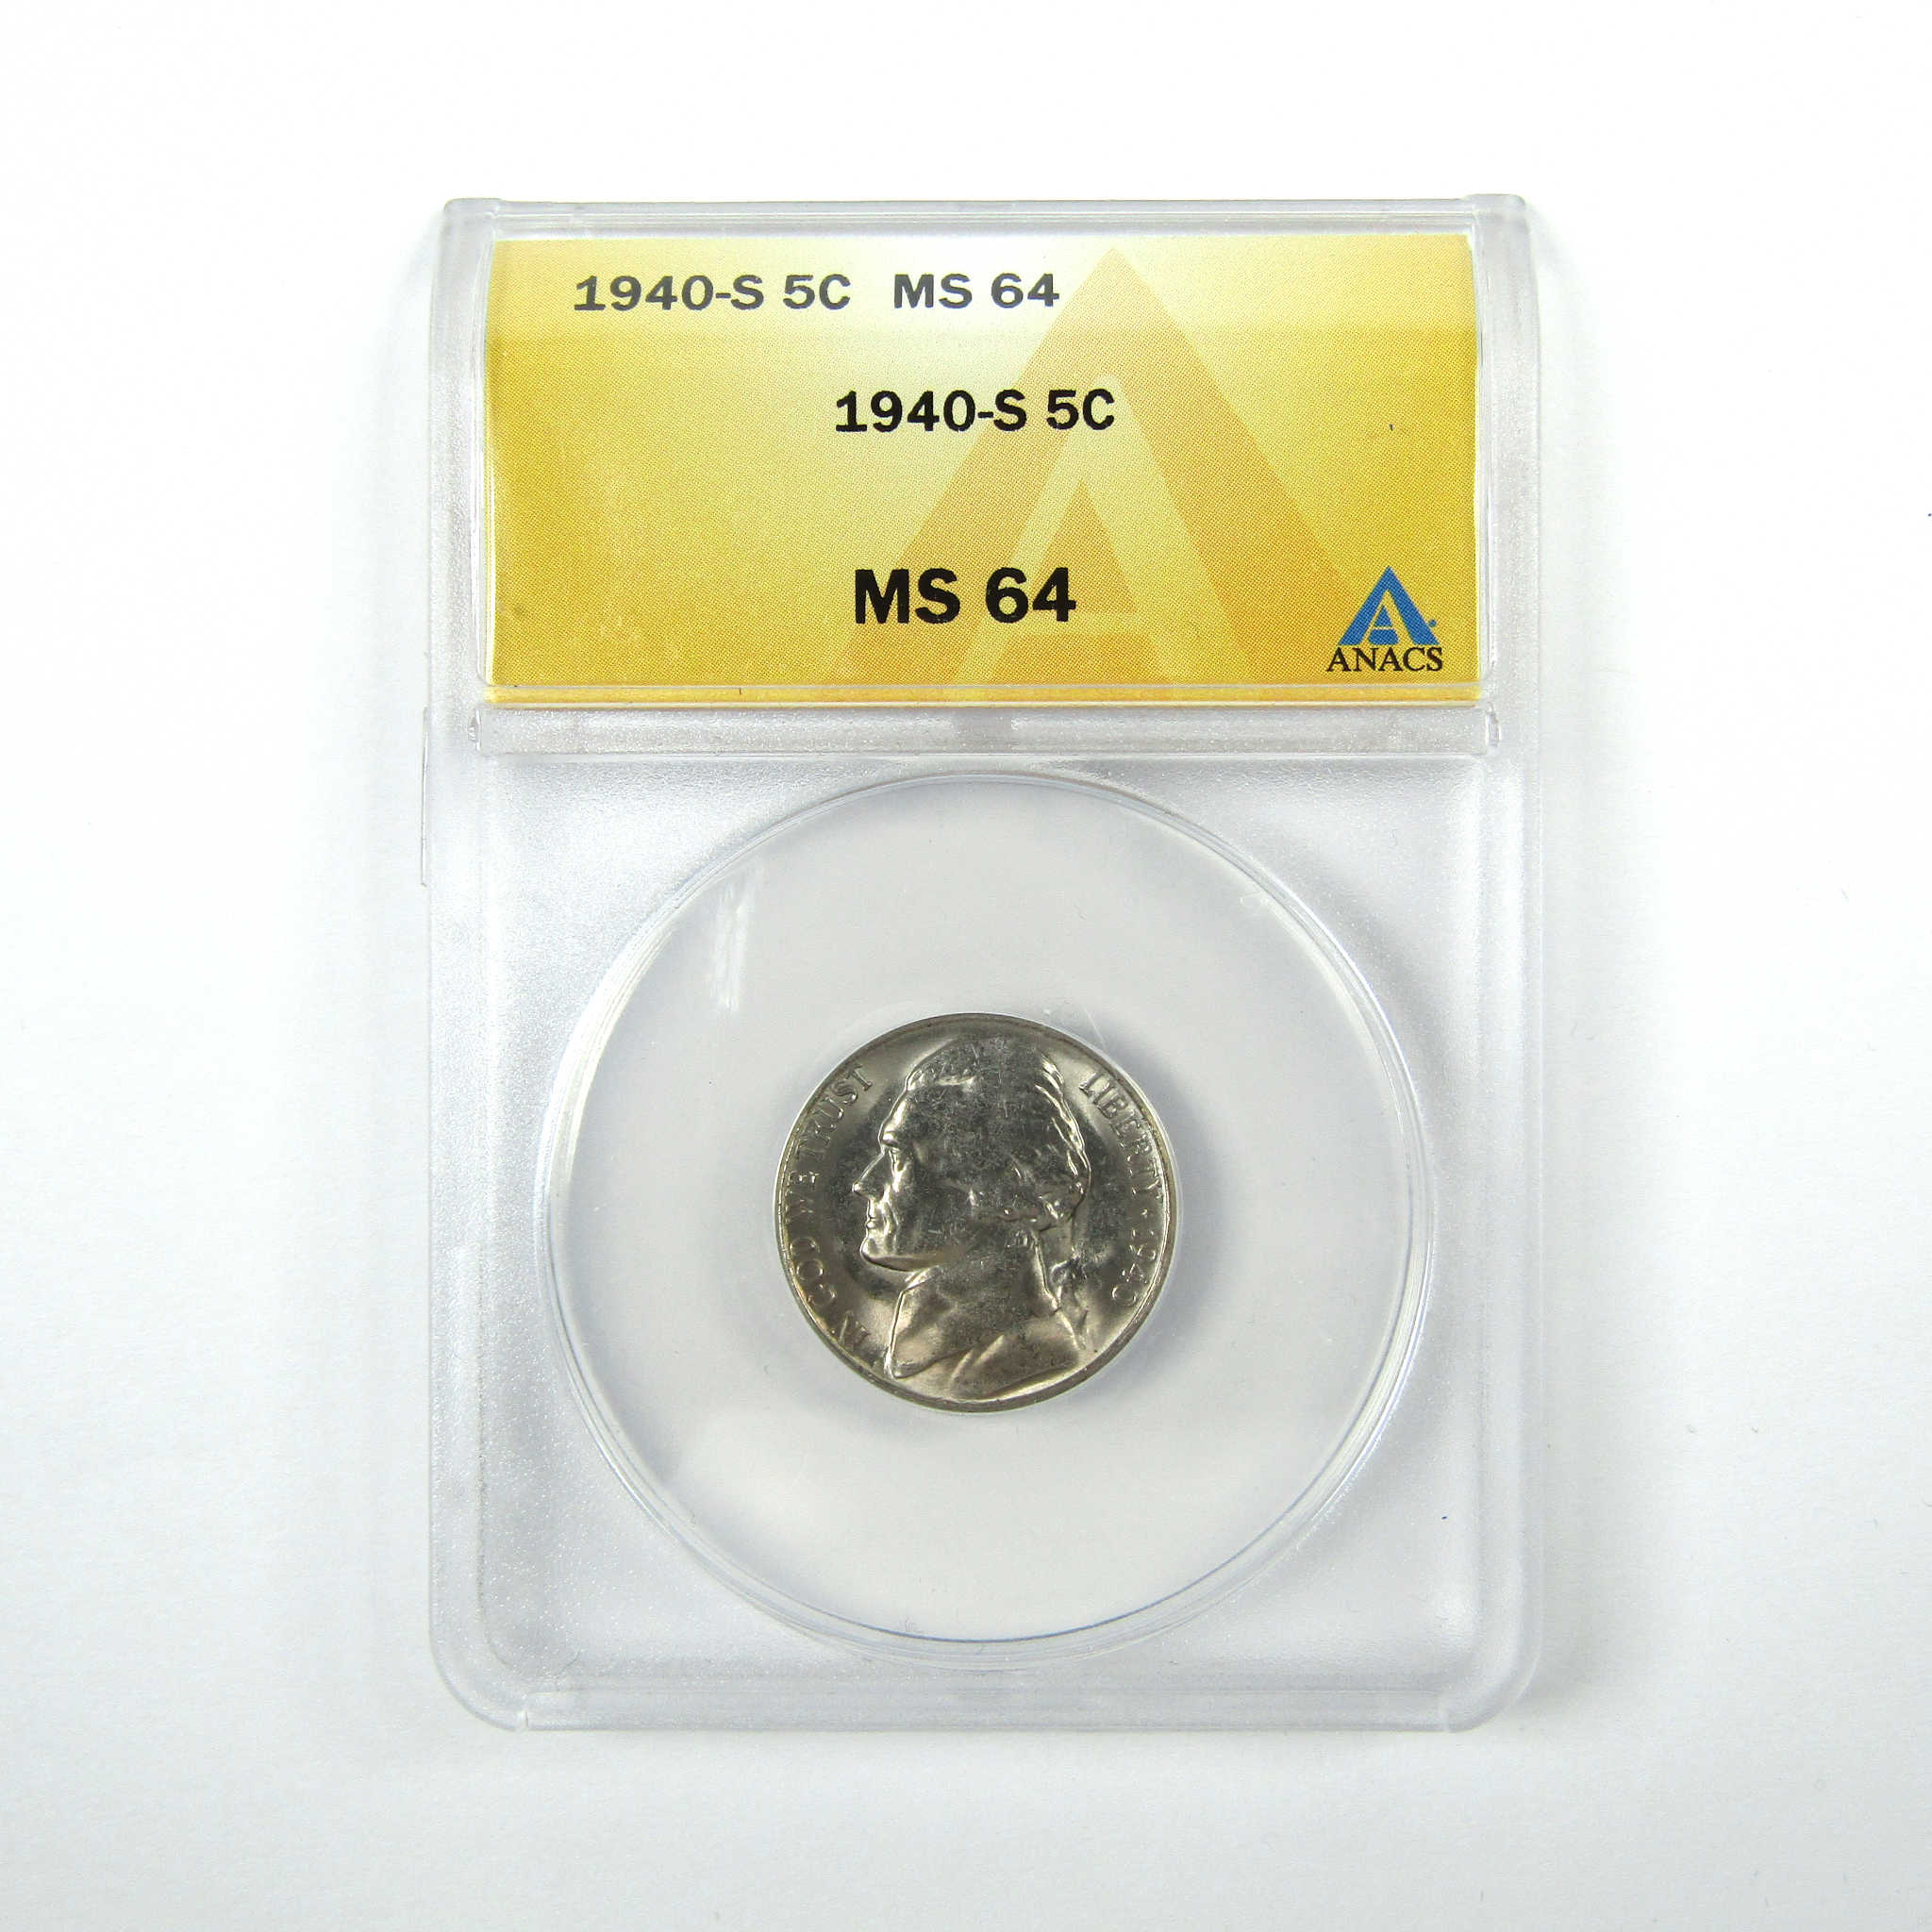 1940 S Jefferson Nickel MS 64 ANACS 5c Uncirculated Coin SKU:CPC5176